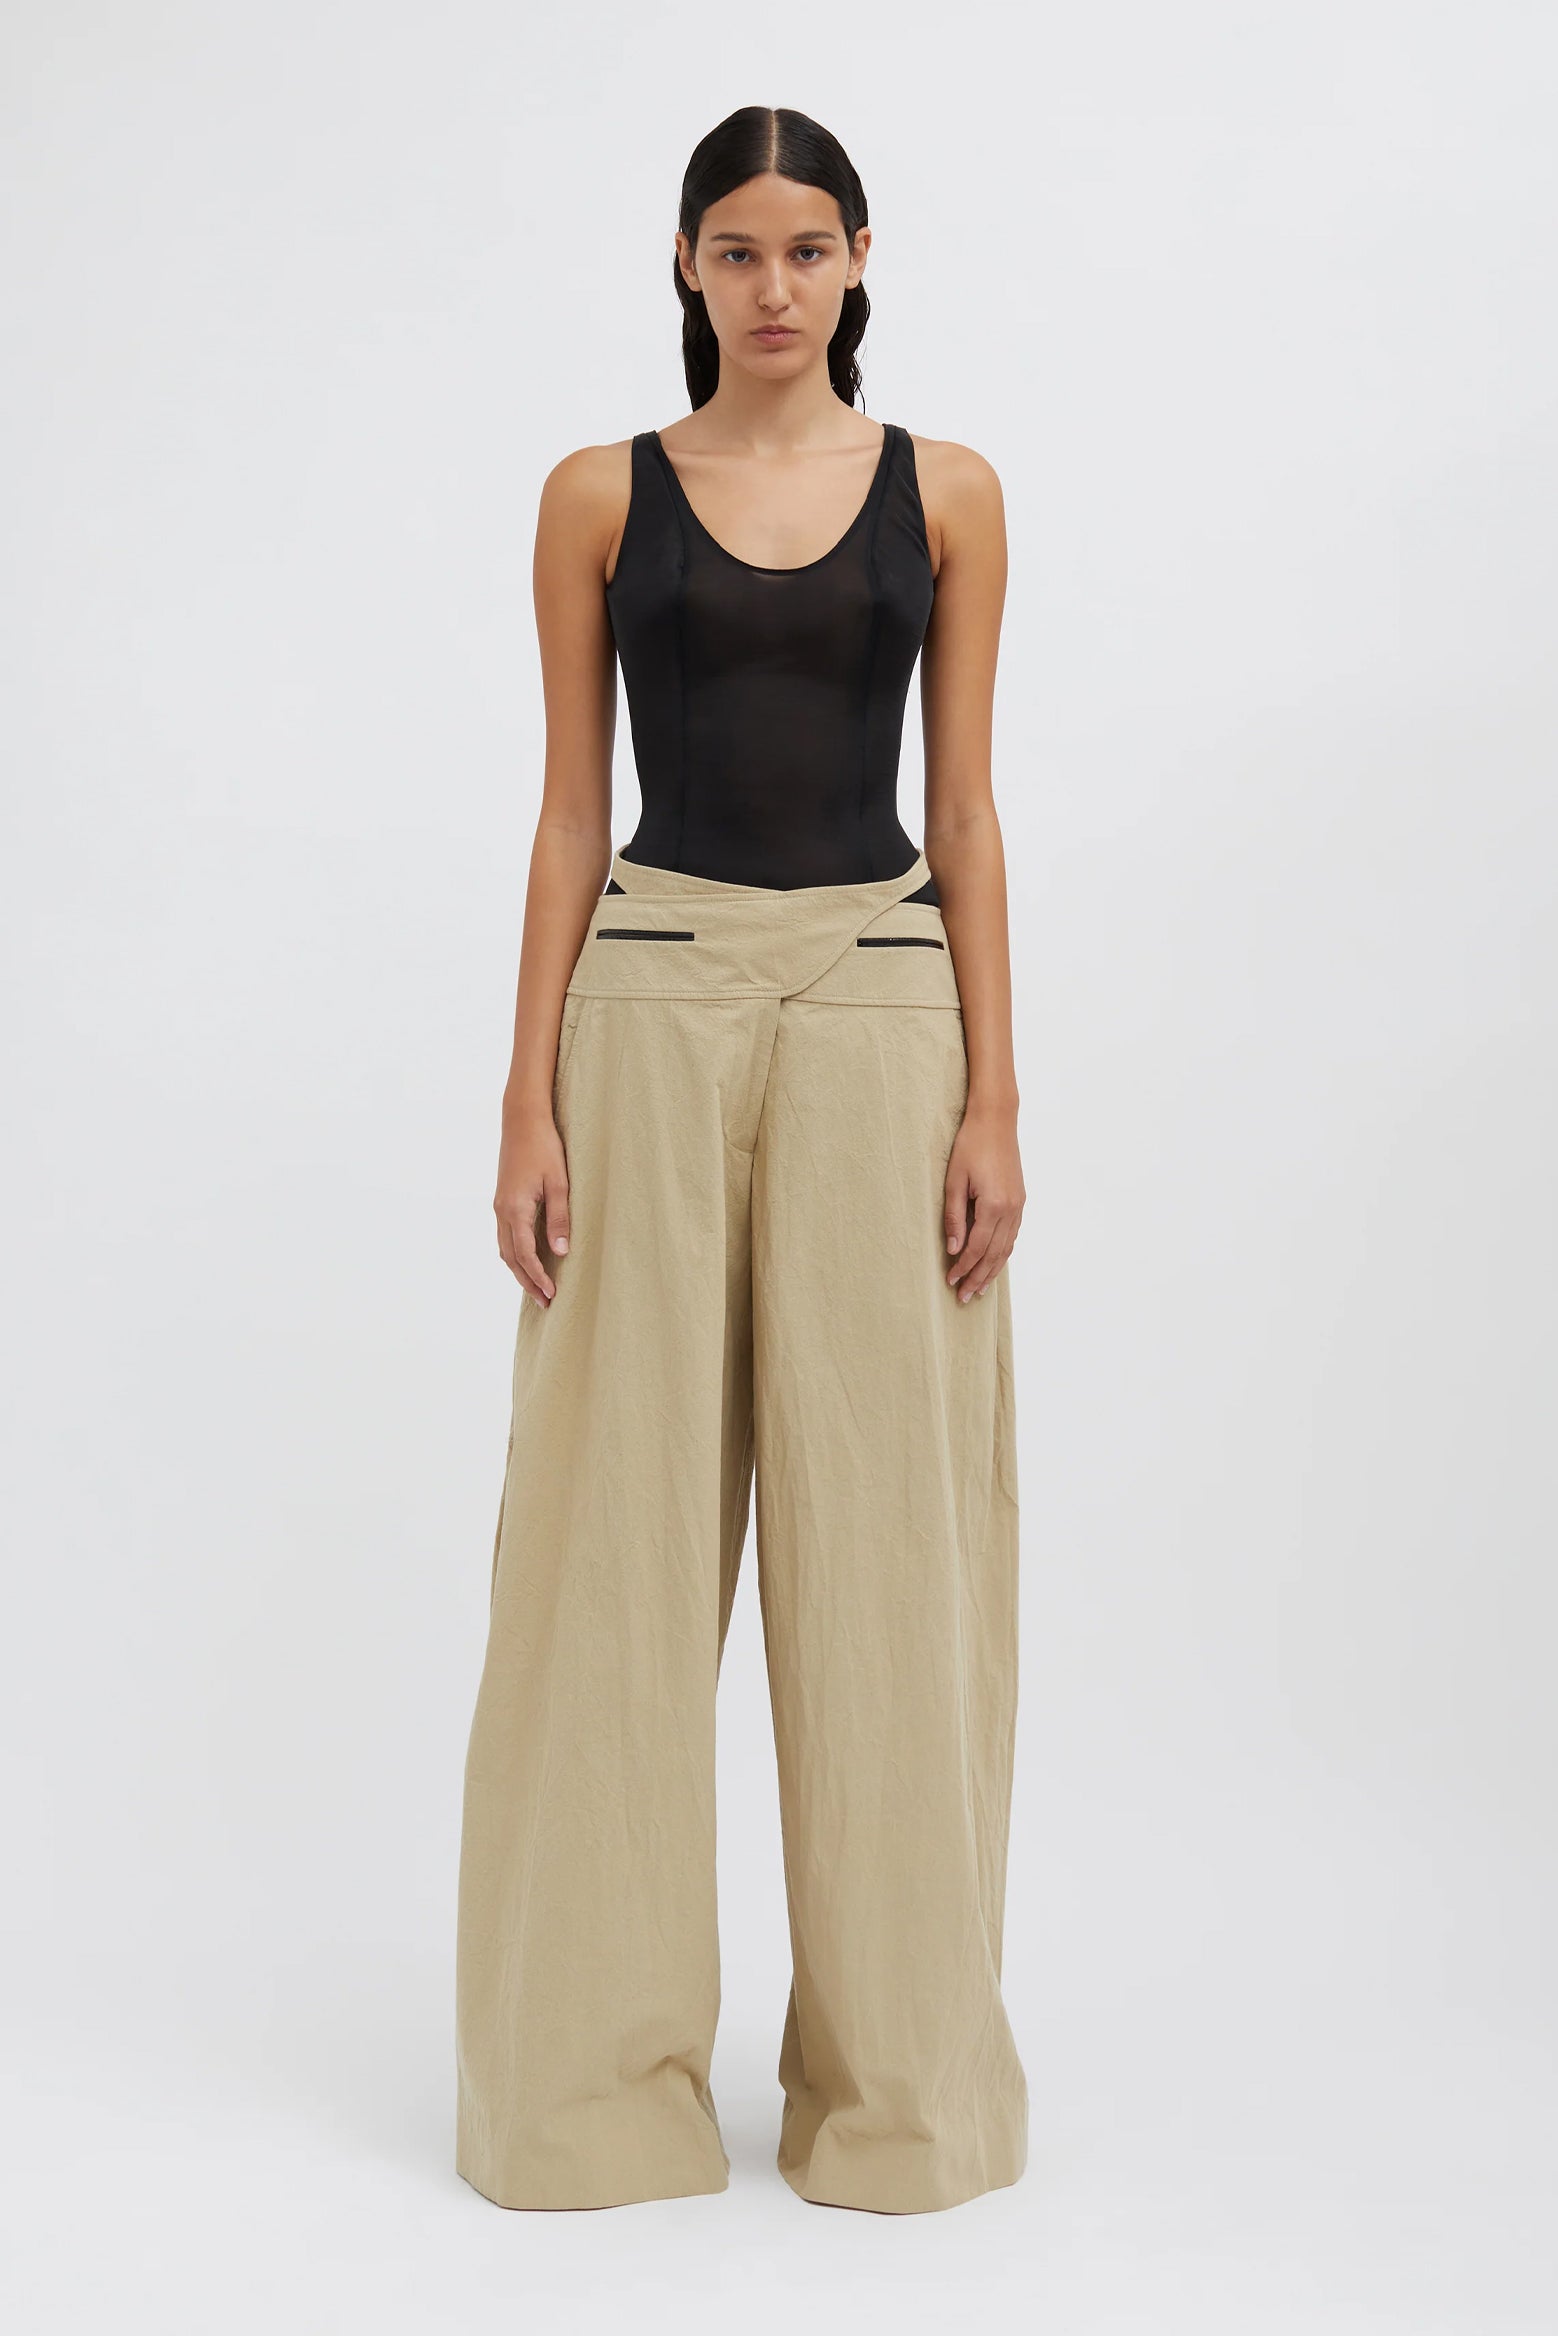 Christopher Esber Mason Bind Trouser in Stone available at The New Trend Australia. 